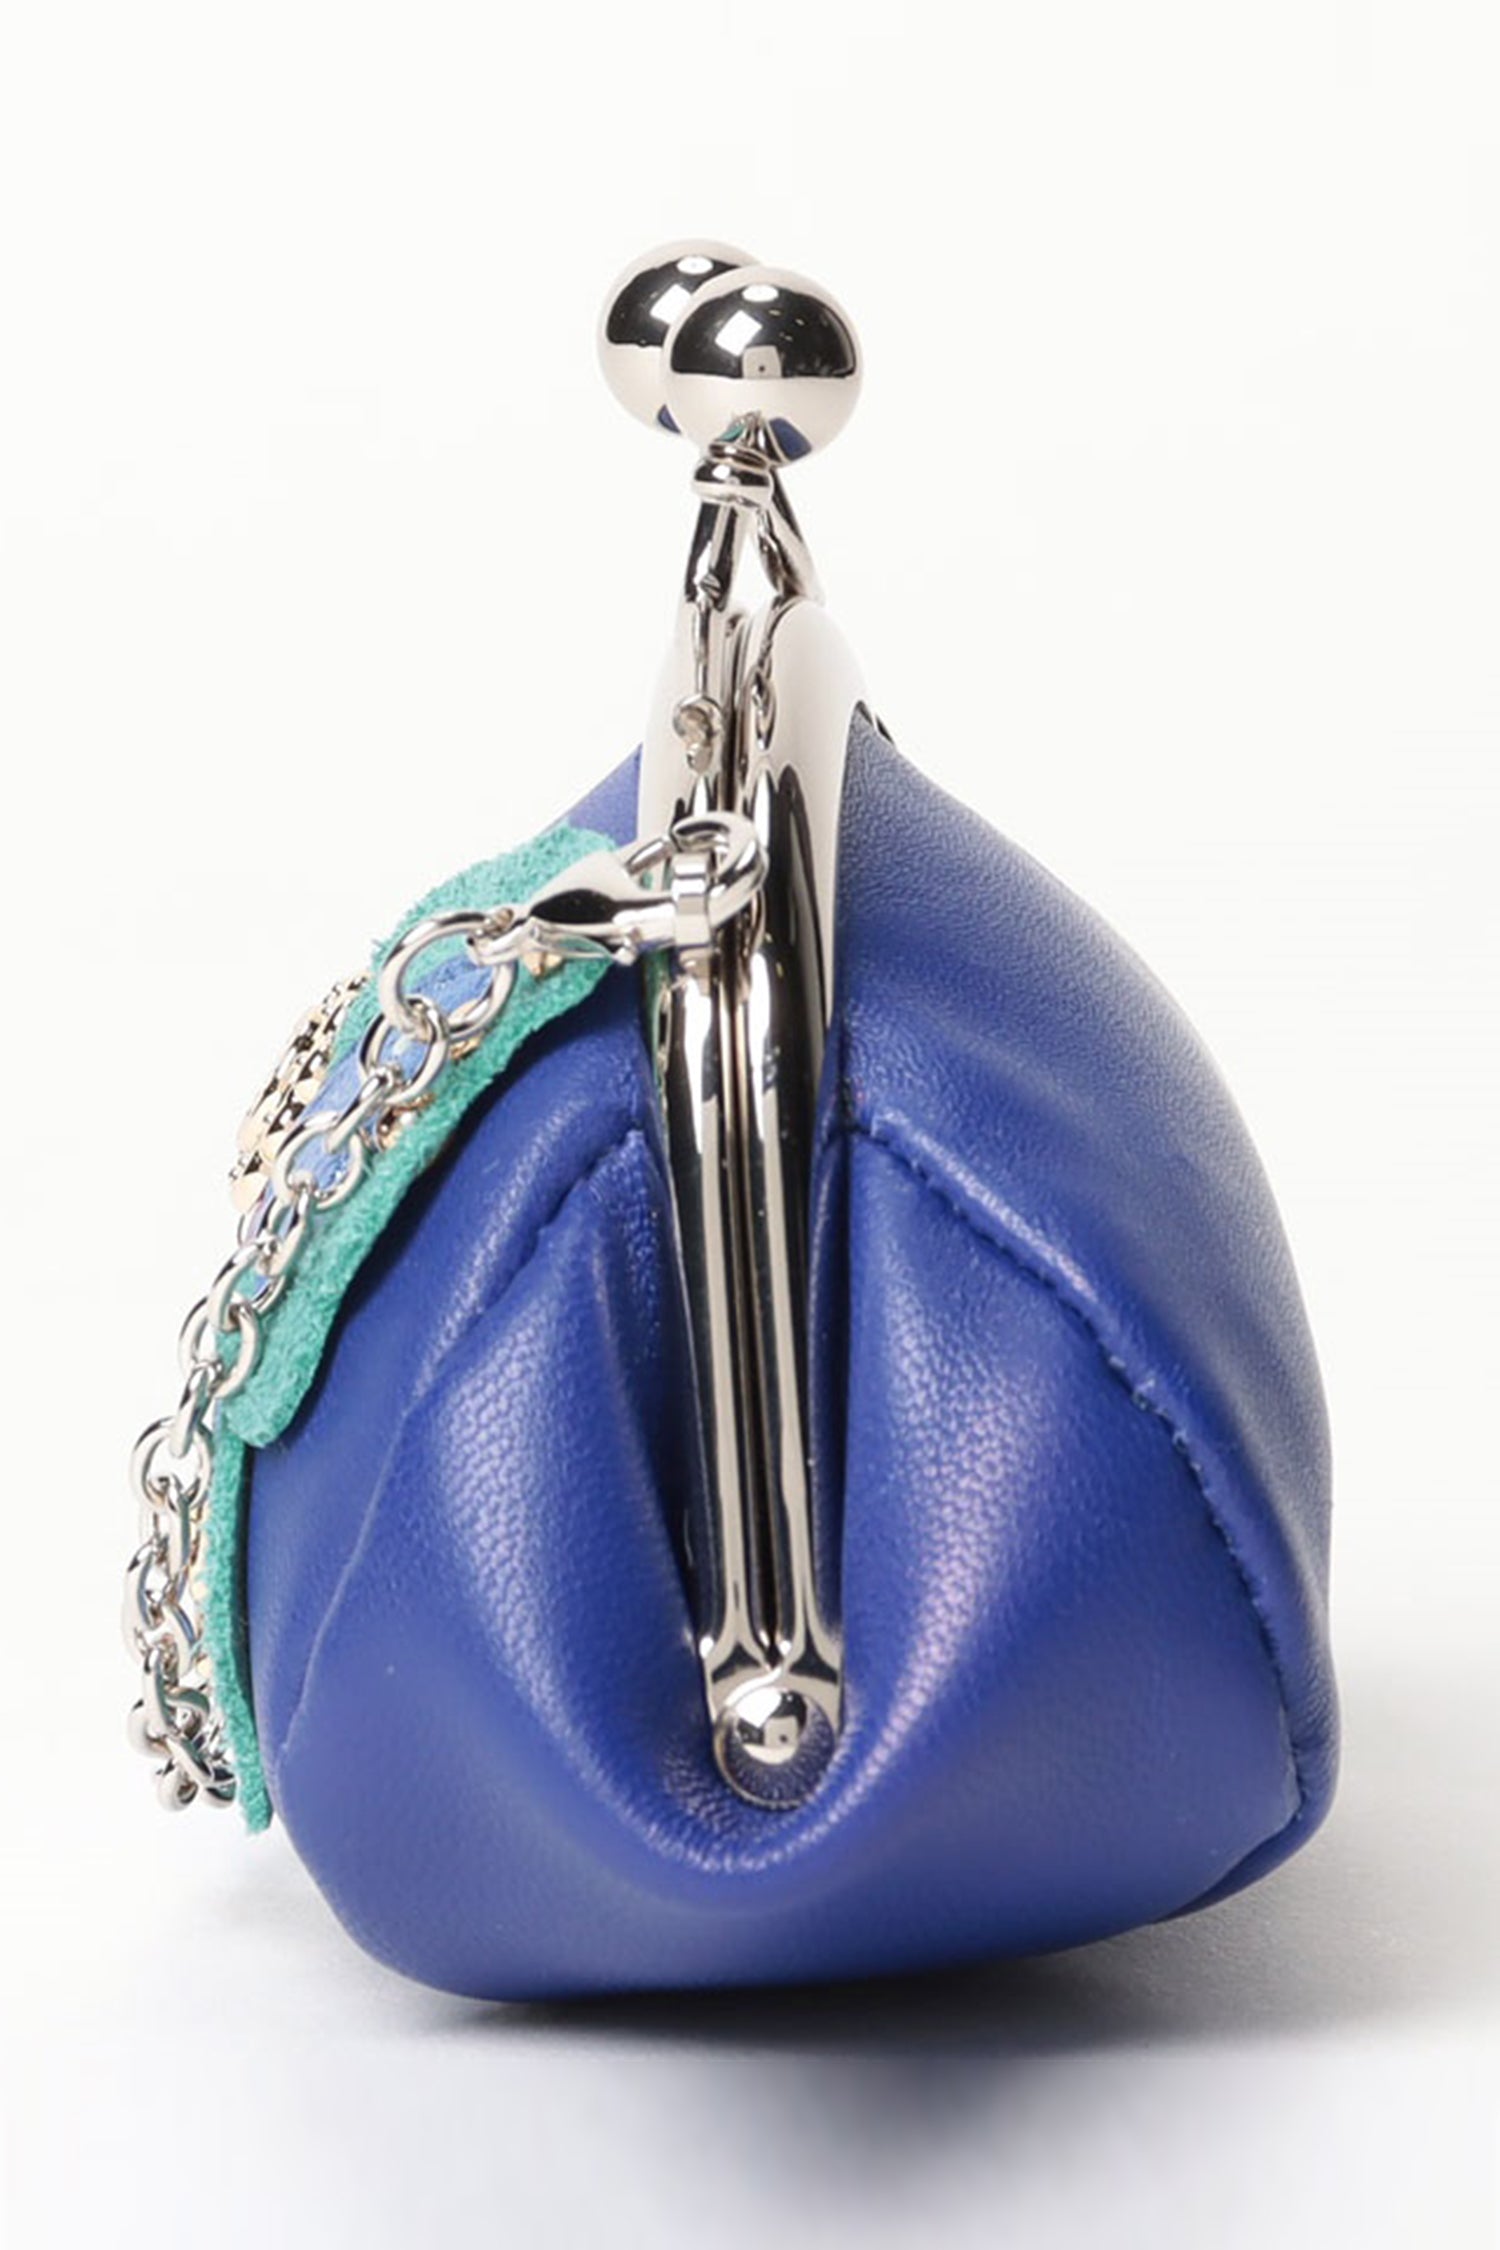 Candy Charm Mini Purse Navy, silver chain, and big Clasp with articulation in middle